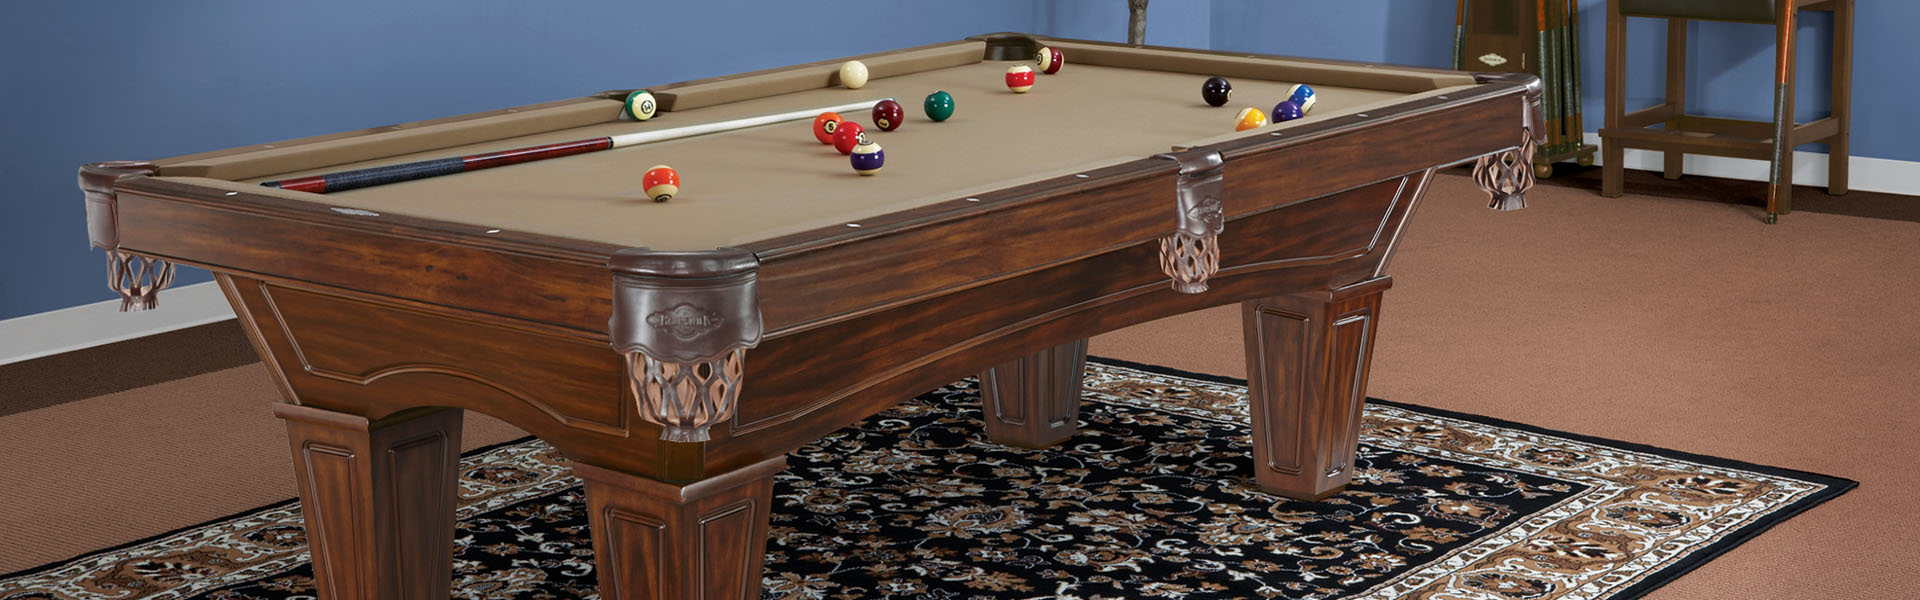 The Benefits of Owning a Billiards Table